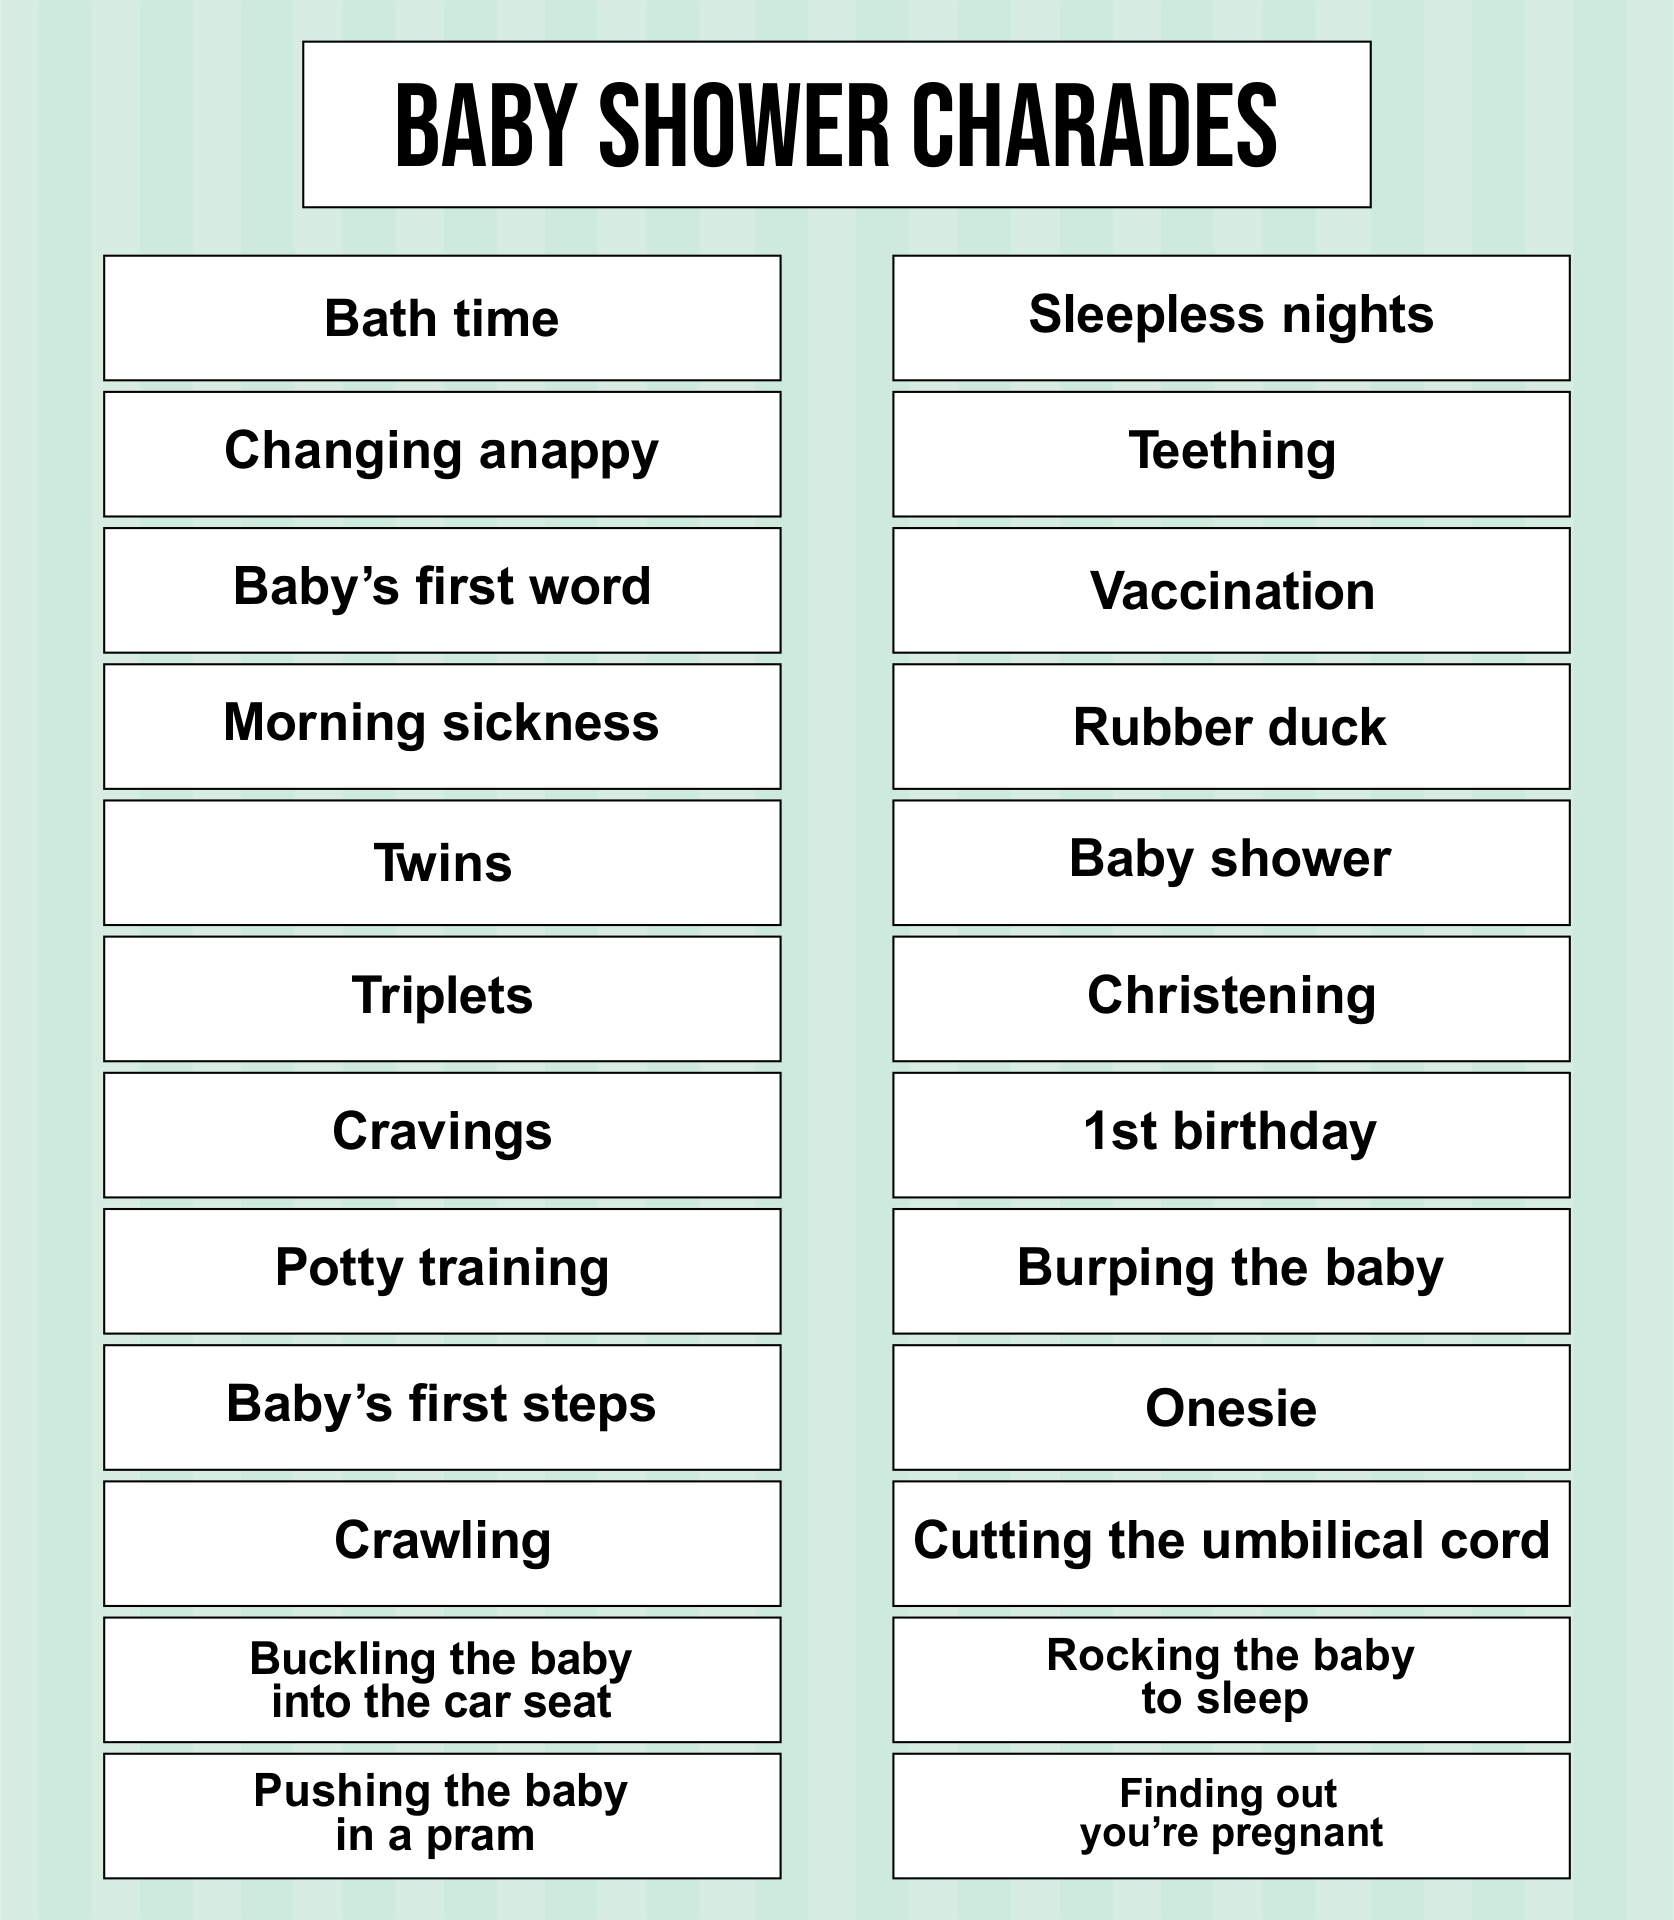 Baby Shower Charades Word List